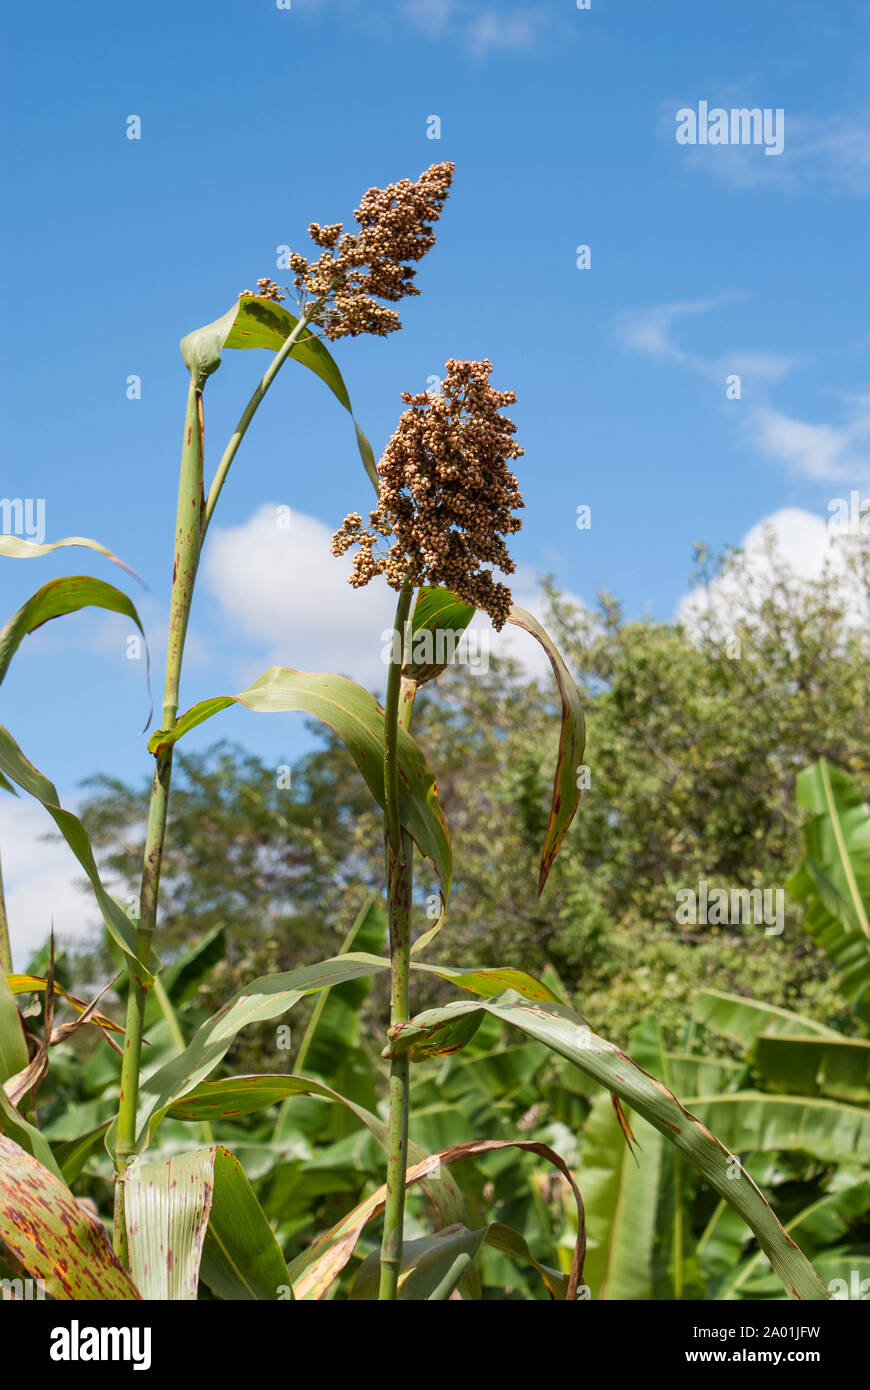 Head of Sorghum (Sorghum bicolor) plant growing in a field in Malawi Stock Photo